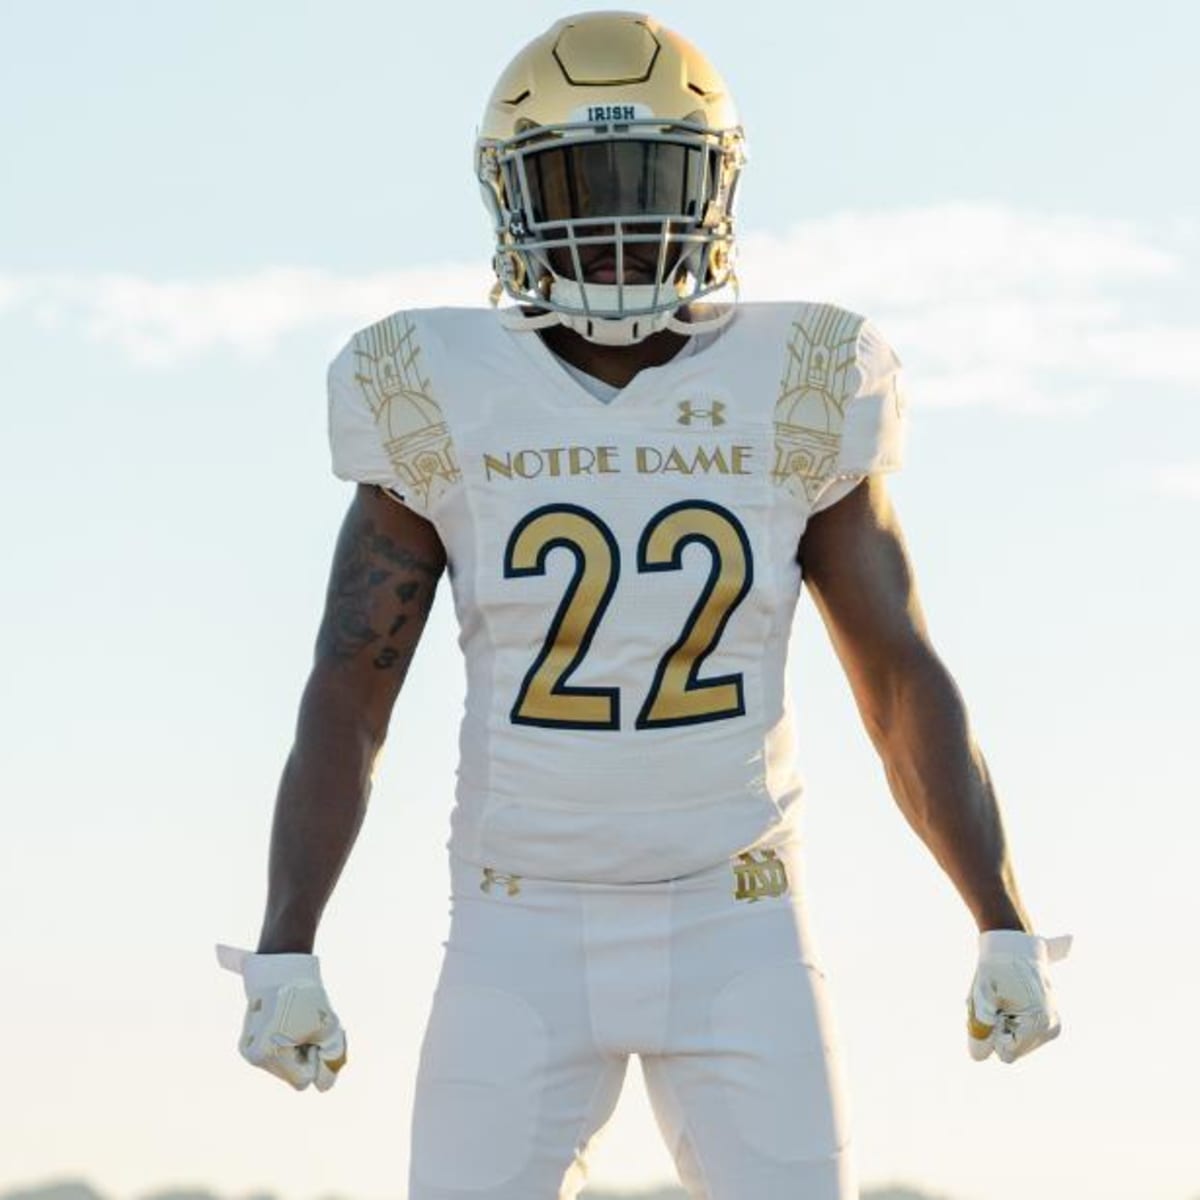 Notre Dame outdoes itself with new Shamrock Series uniforms (and